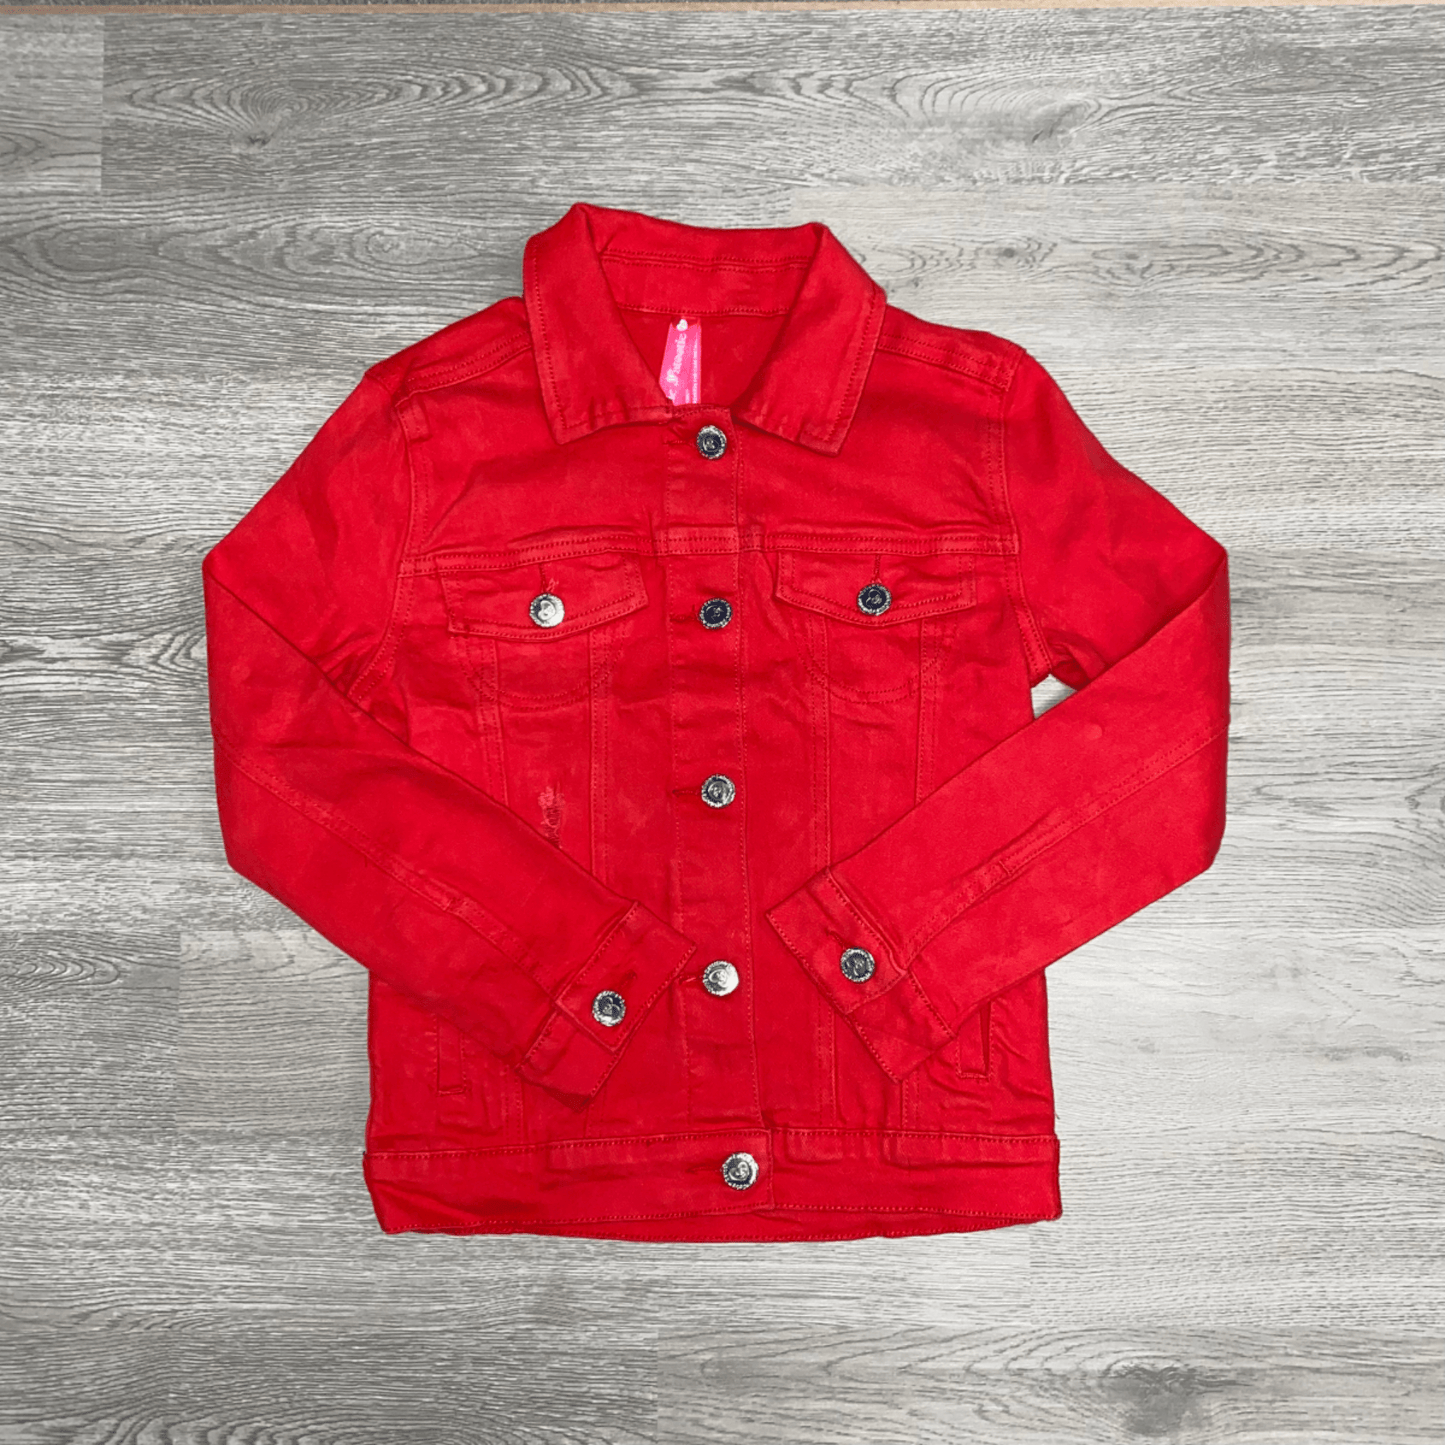 Your little one can showcase her inner diva in this red denim jacket.  This button down jacket is the perfect addition to any wardrobe.